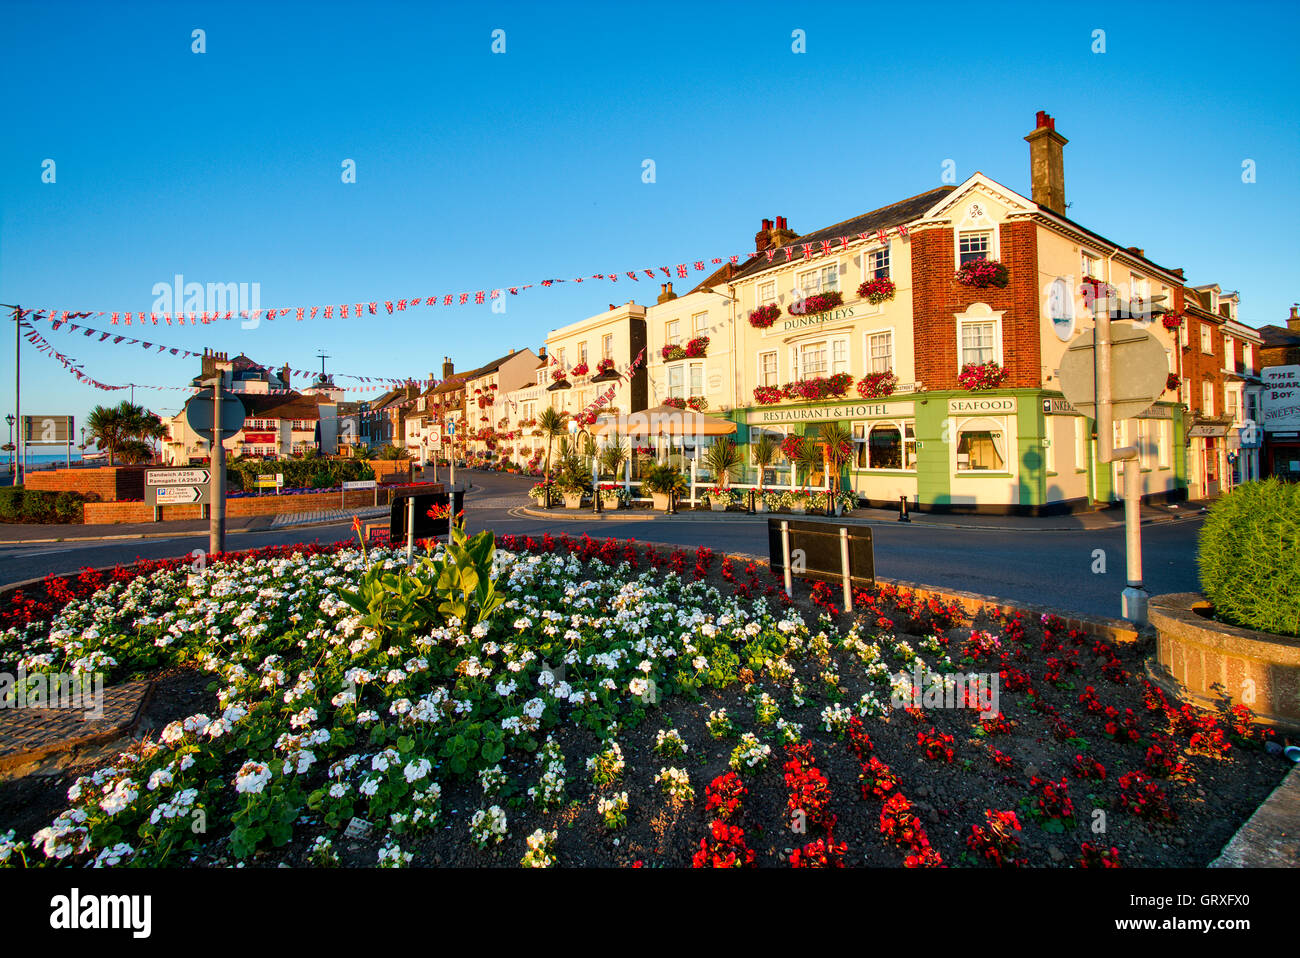 England, Deal. Flower display on roundabout in foreground, with Beach Street row of three story old buildings including Dunkerlays restaurant hotel. Stock Photo